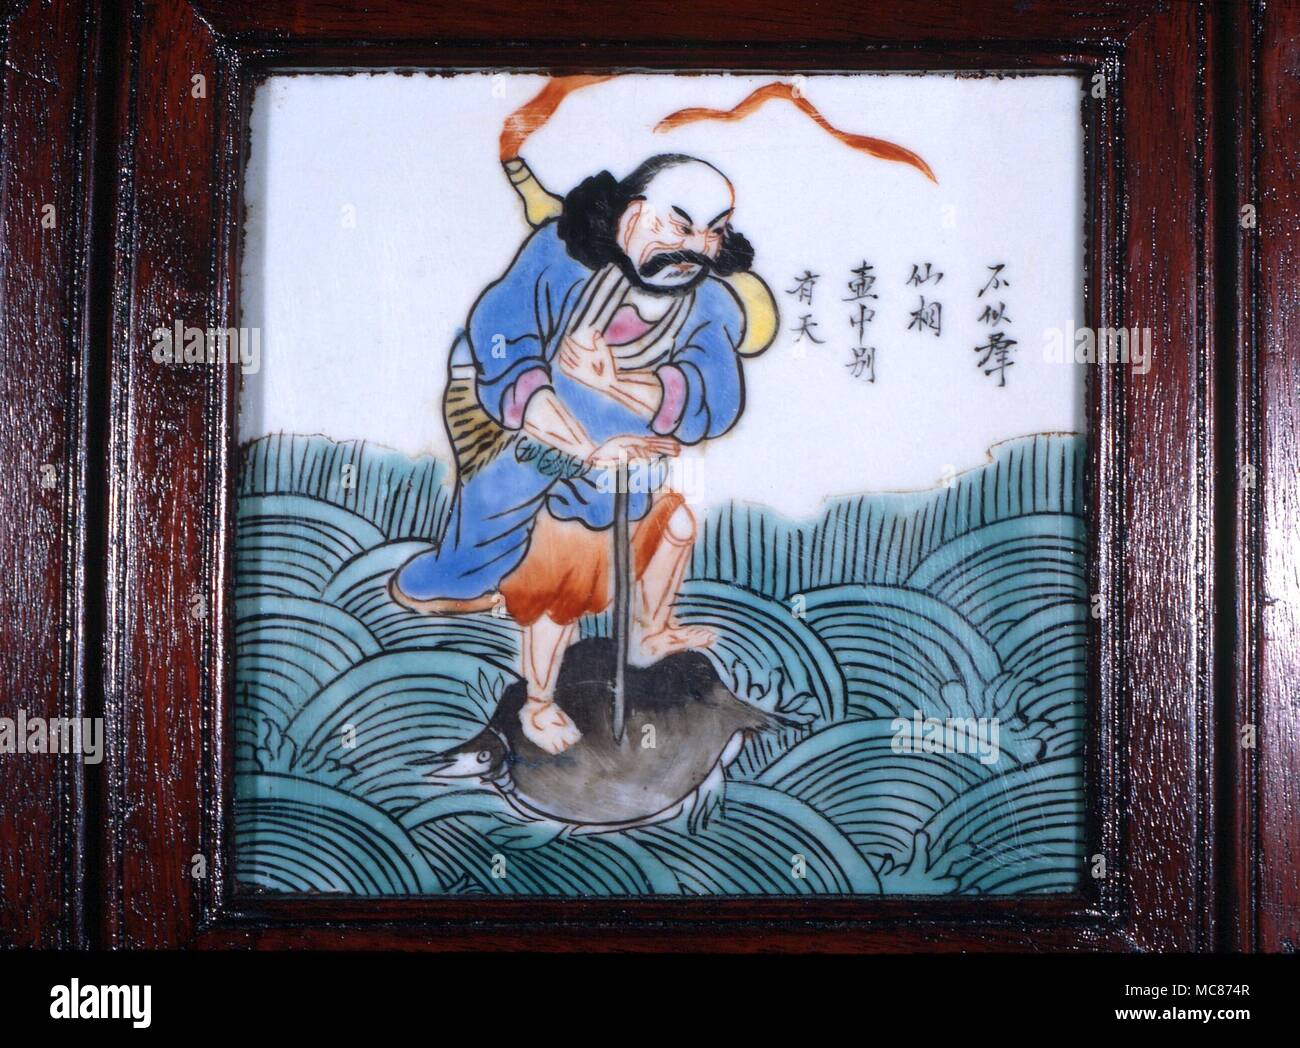 Taoism - One of the Taoist 'Eight Immortals- (Pa Hsien). Li T'ieh-Kuai, who (his body accidentally destroyed in his soul's absence) took the body of a lame beggar. Proficient in magic. Mid-19th century Chinese tile, from a screen Stock Photo